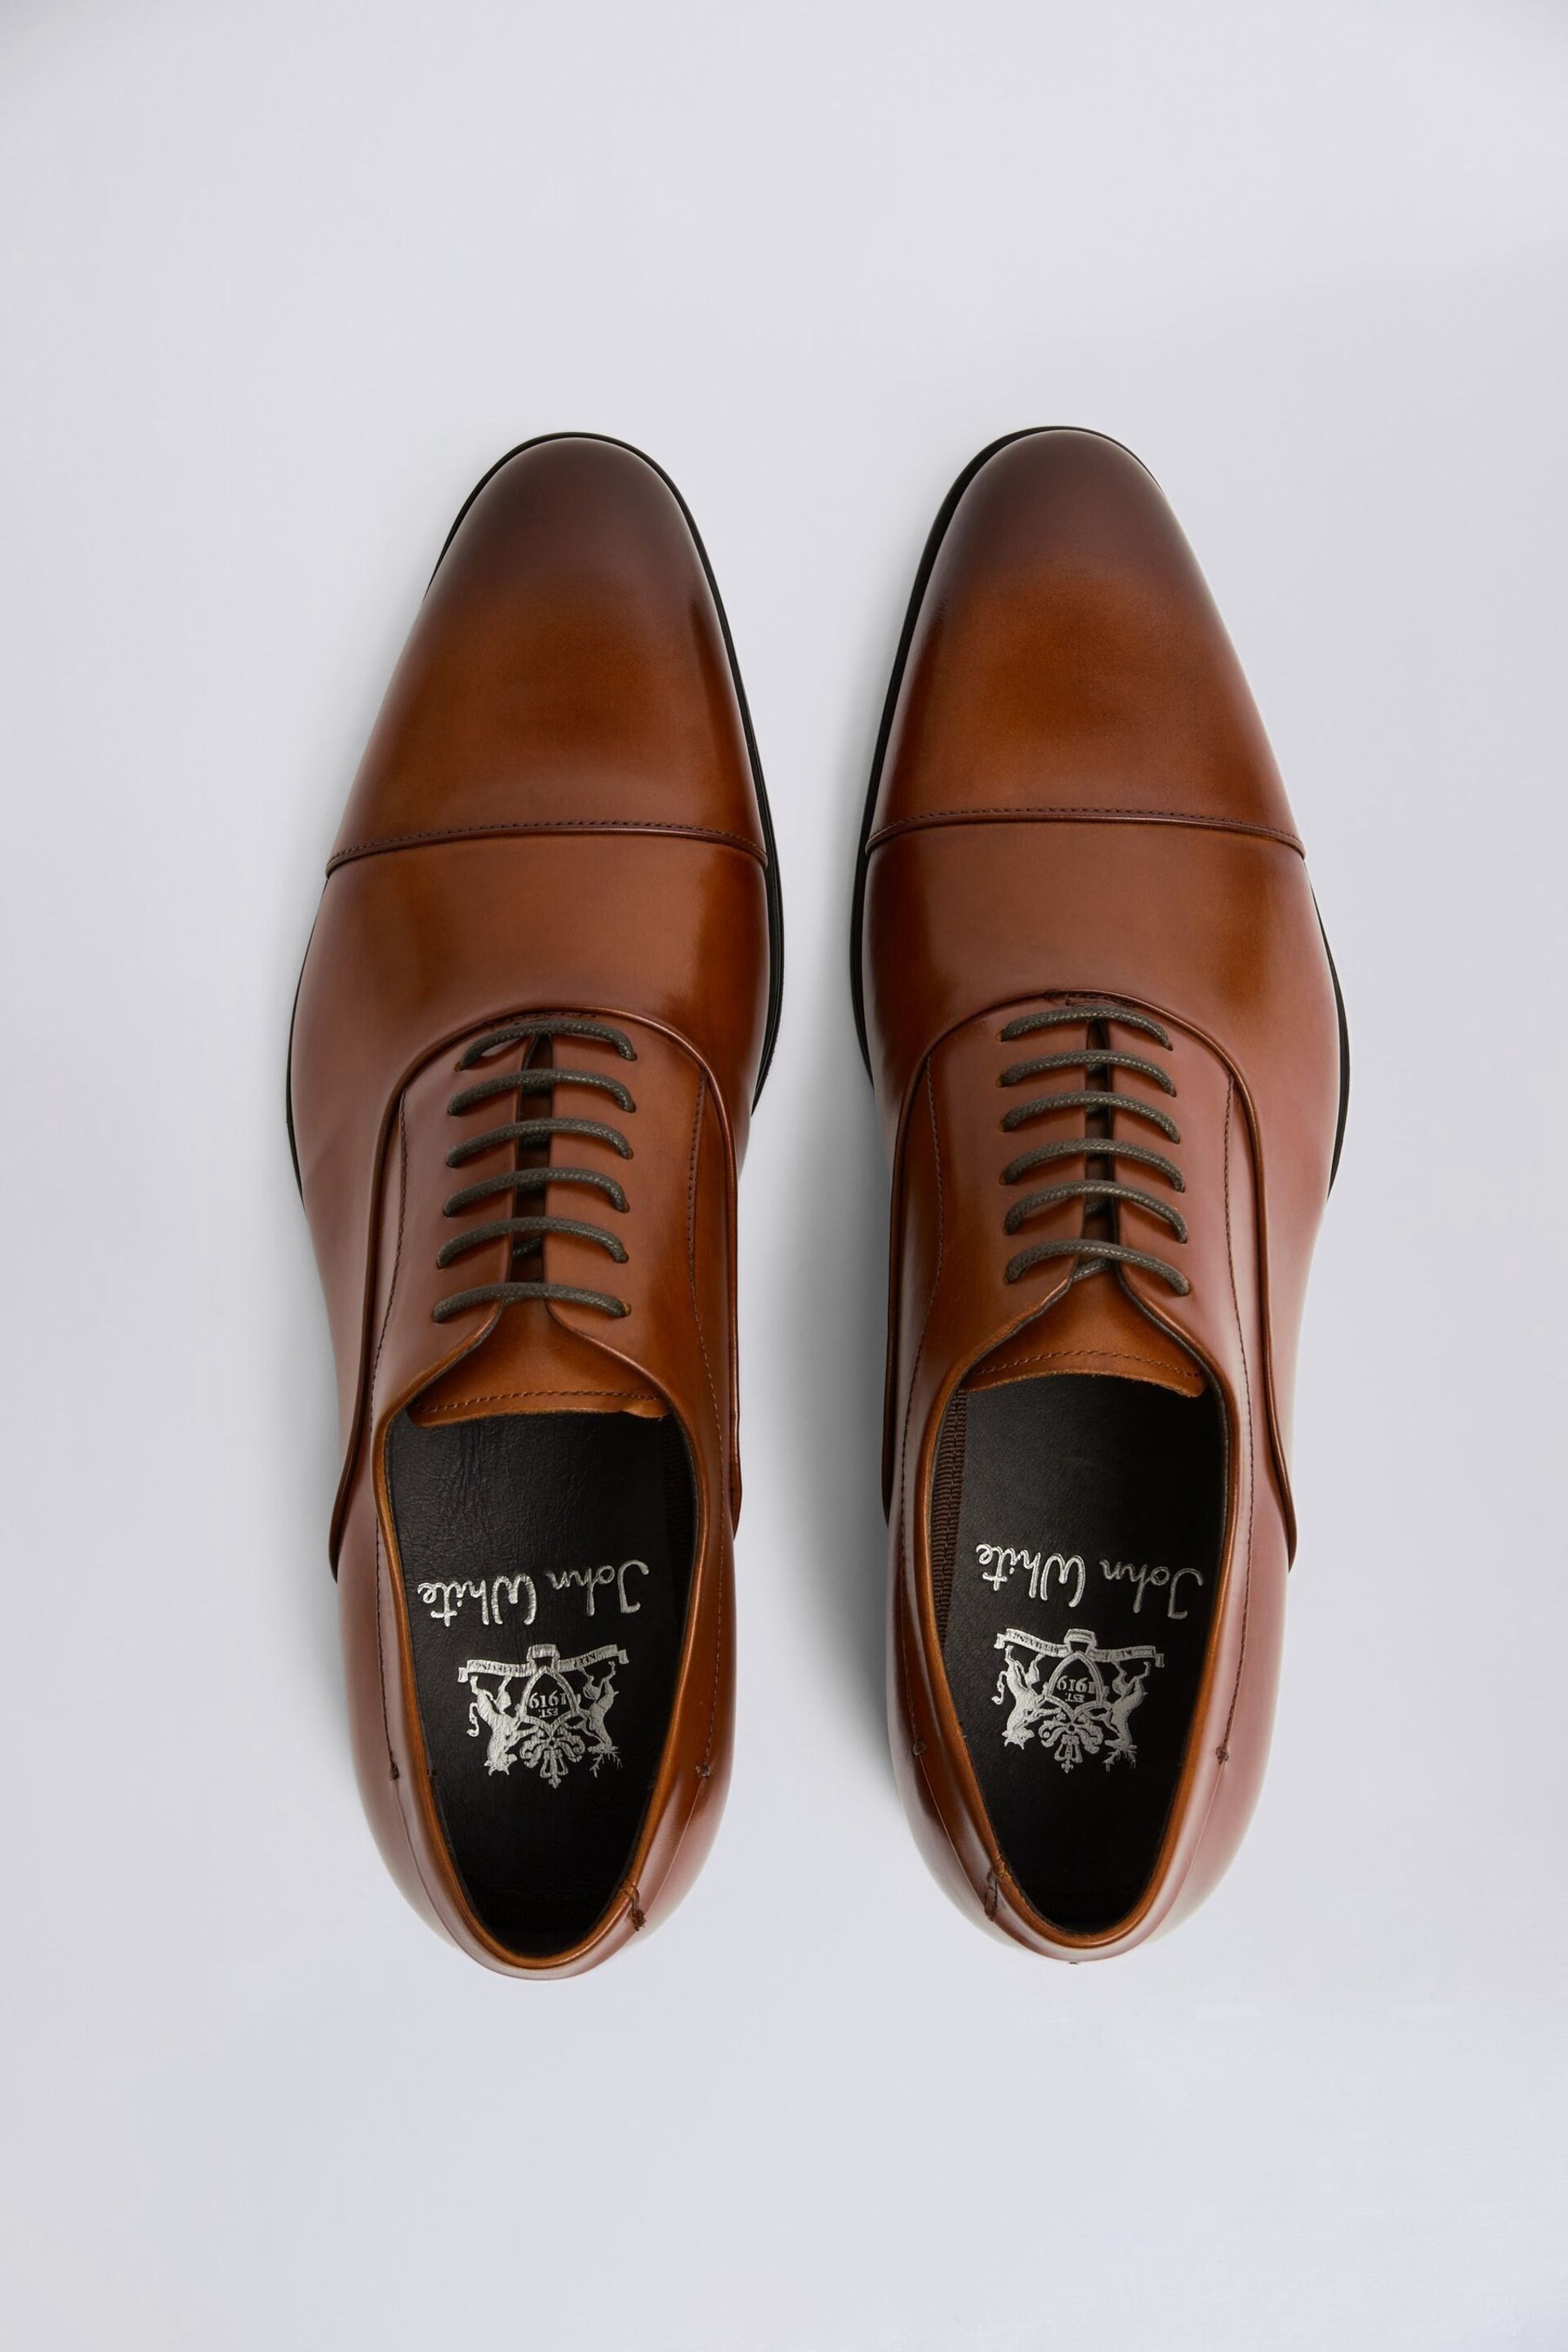 MOSS John Guildhall Oxford Shoes - Image 3 of 5